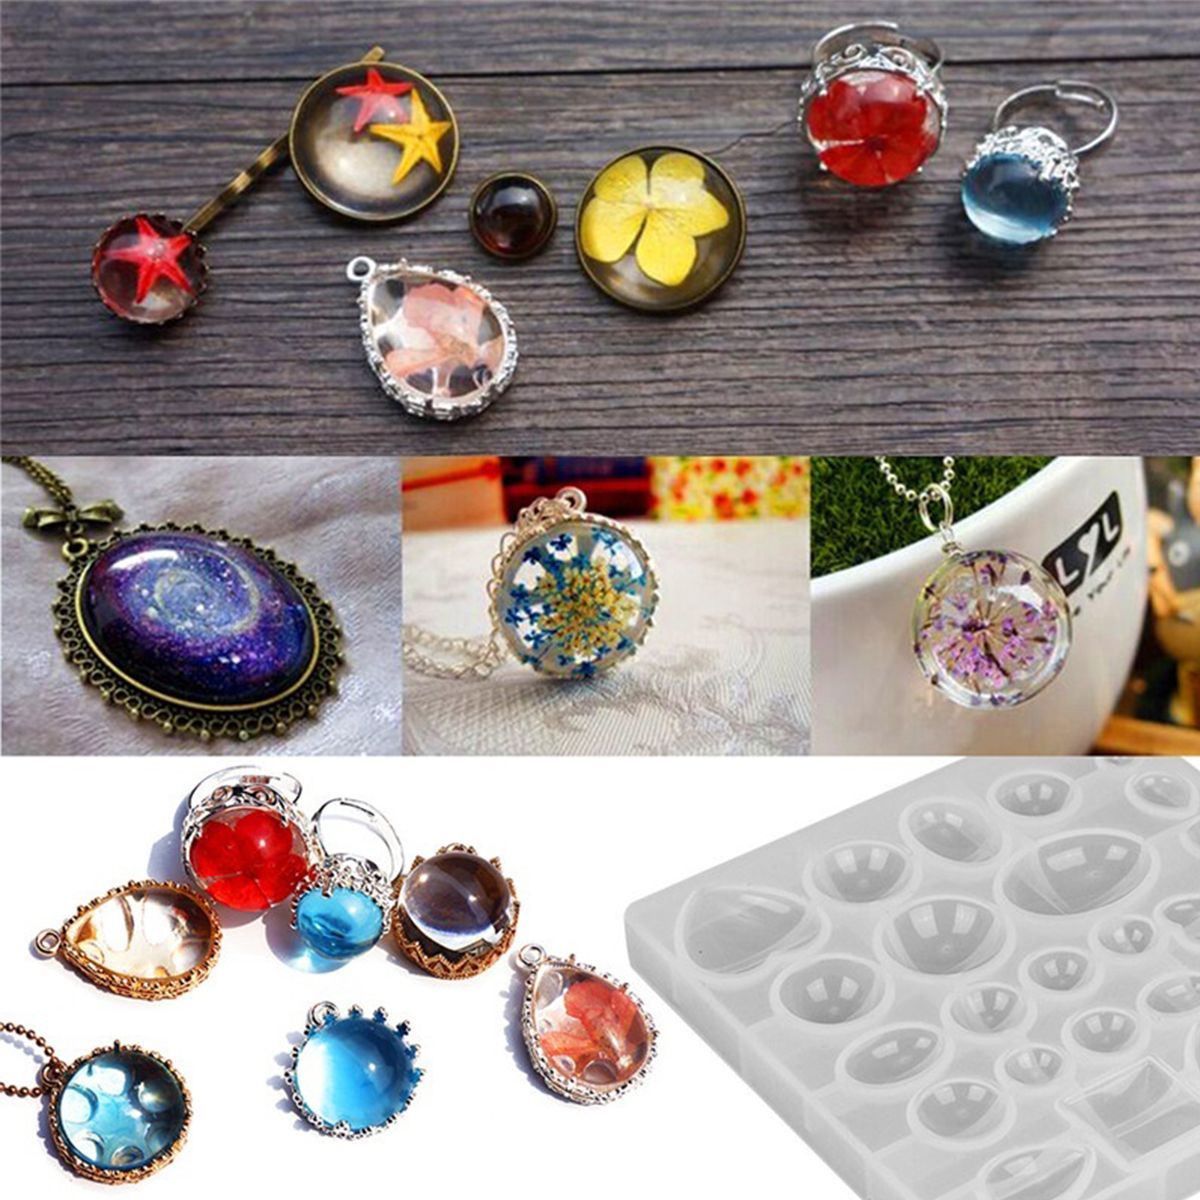 DIY-Resin-Casting-Molds-Silicone-Jewelry-Pendant-Craft-Making-Mould-Pendant-Tray-1714218